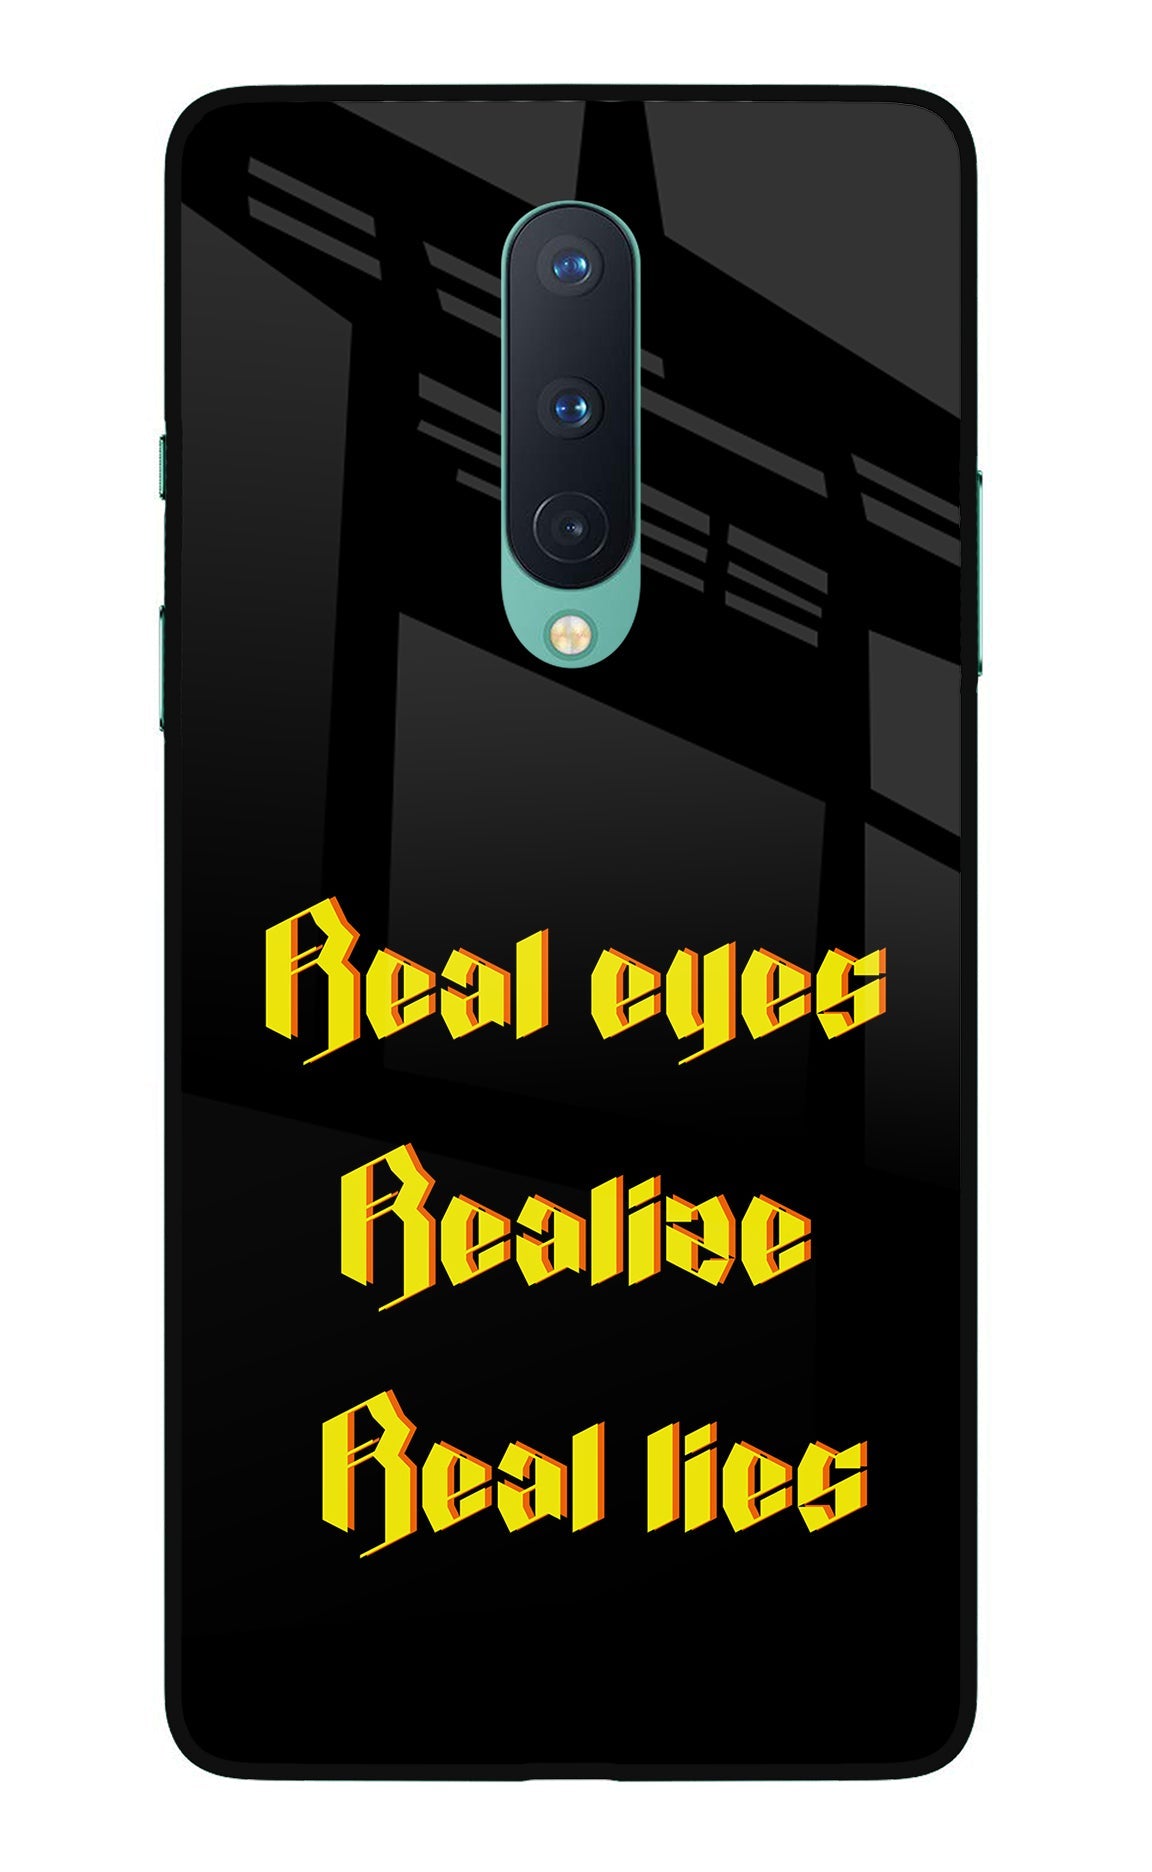 Real Eyes Realize Real Lies Oneplus 8 Glass Case